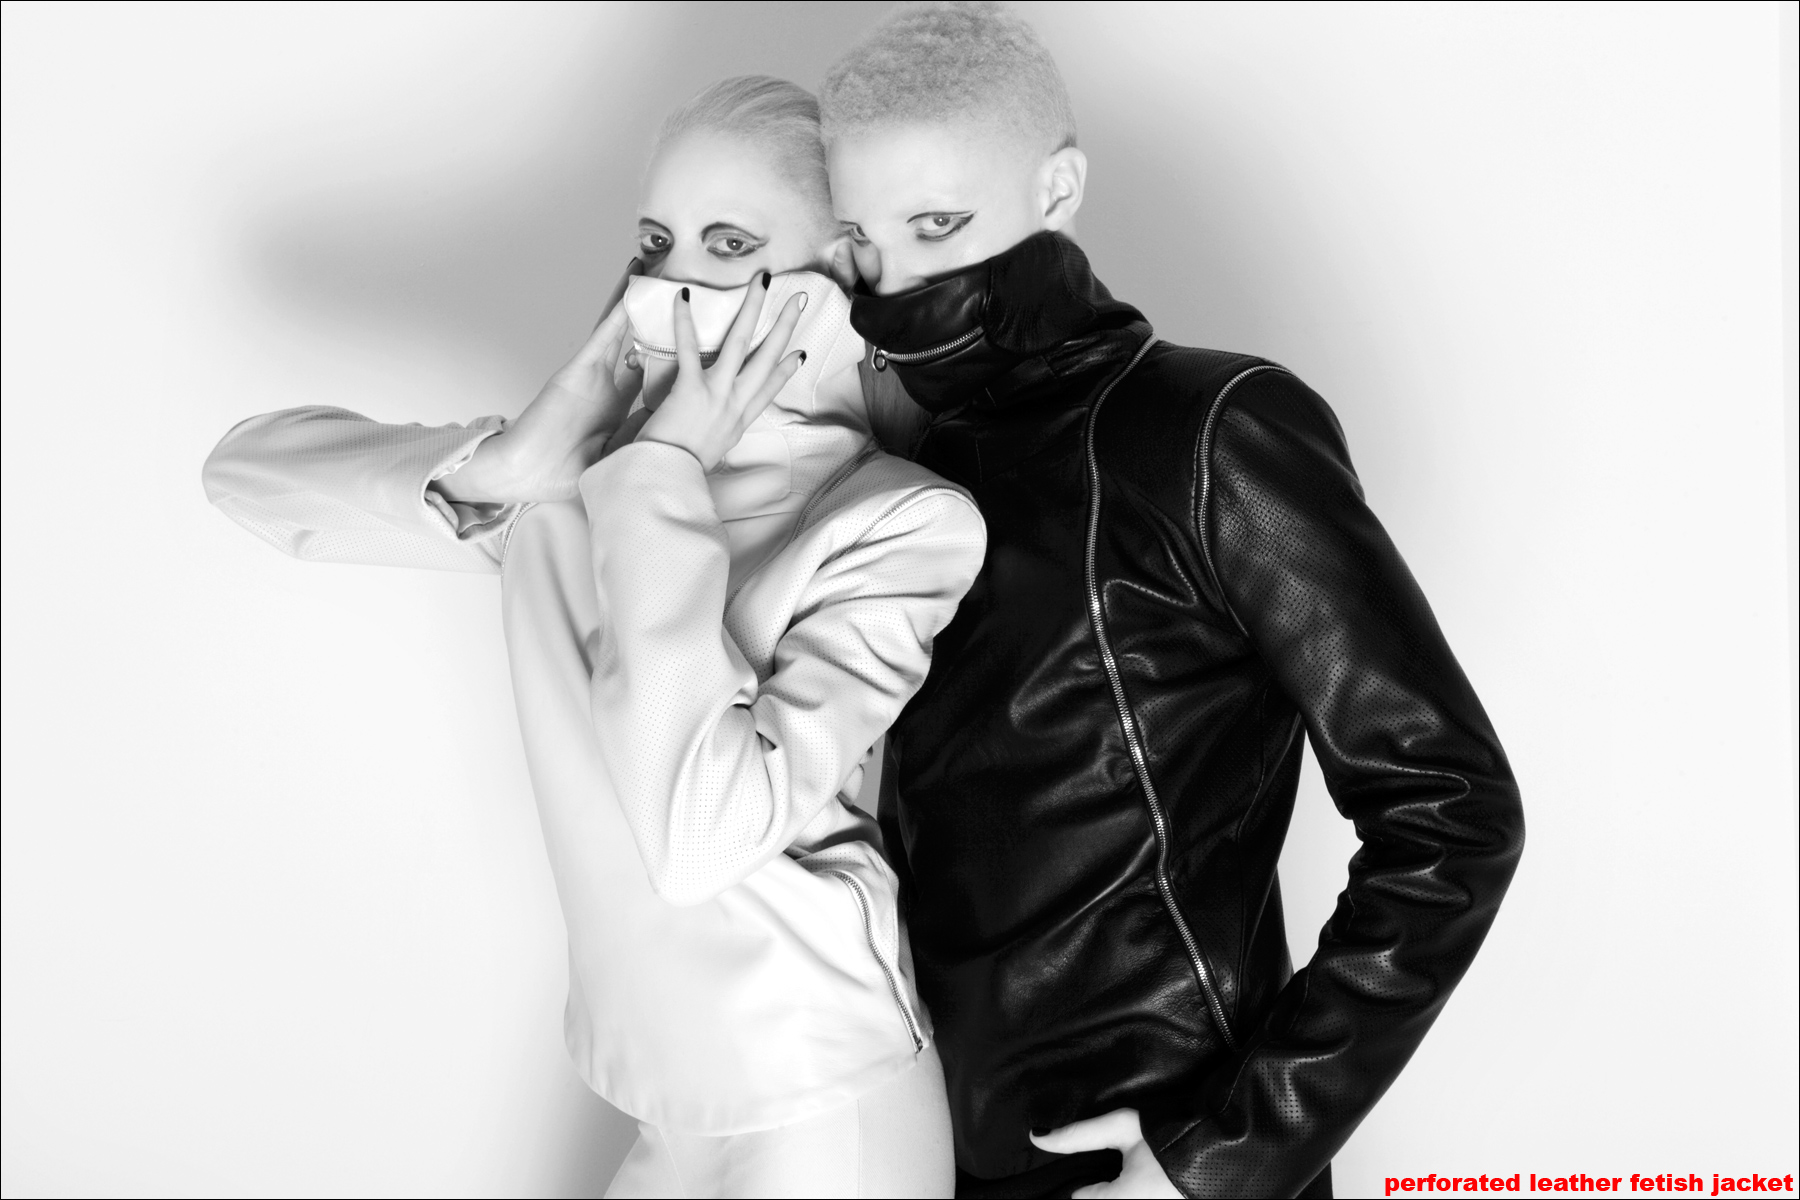 Diandra Forrest and Shaun Ross in Ashton Michael AW 2013, photographed by Alexander Thompson for Ponyboy Magazine.